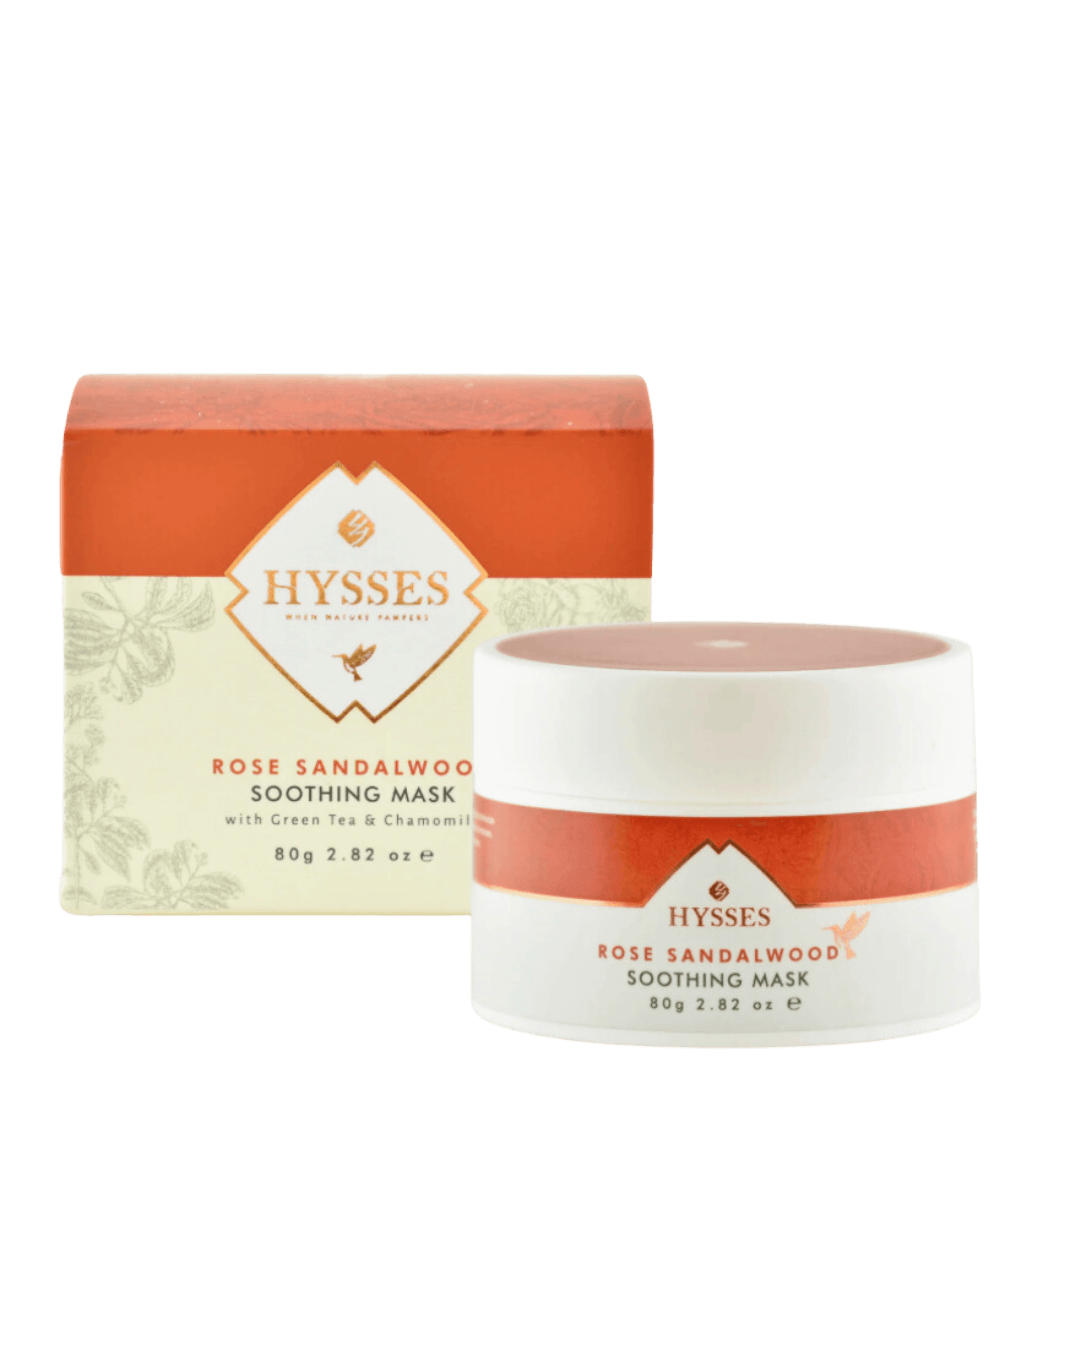 Daily Vanity Beauty Awards 2024 Best Skincare HYSSES Soothing Mask Rose Sandalwood Voted By Beauty Experts